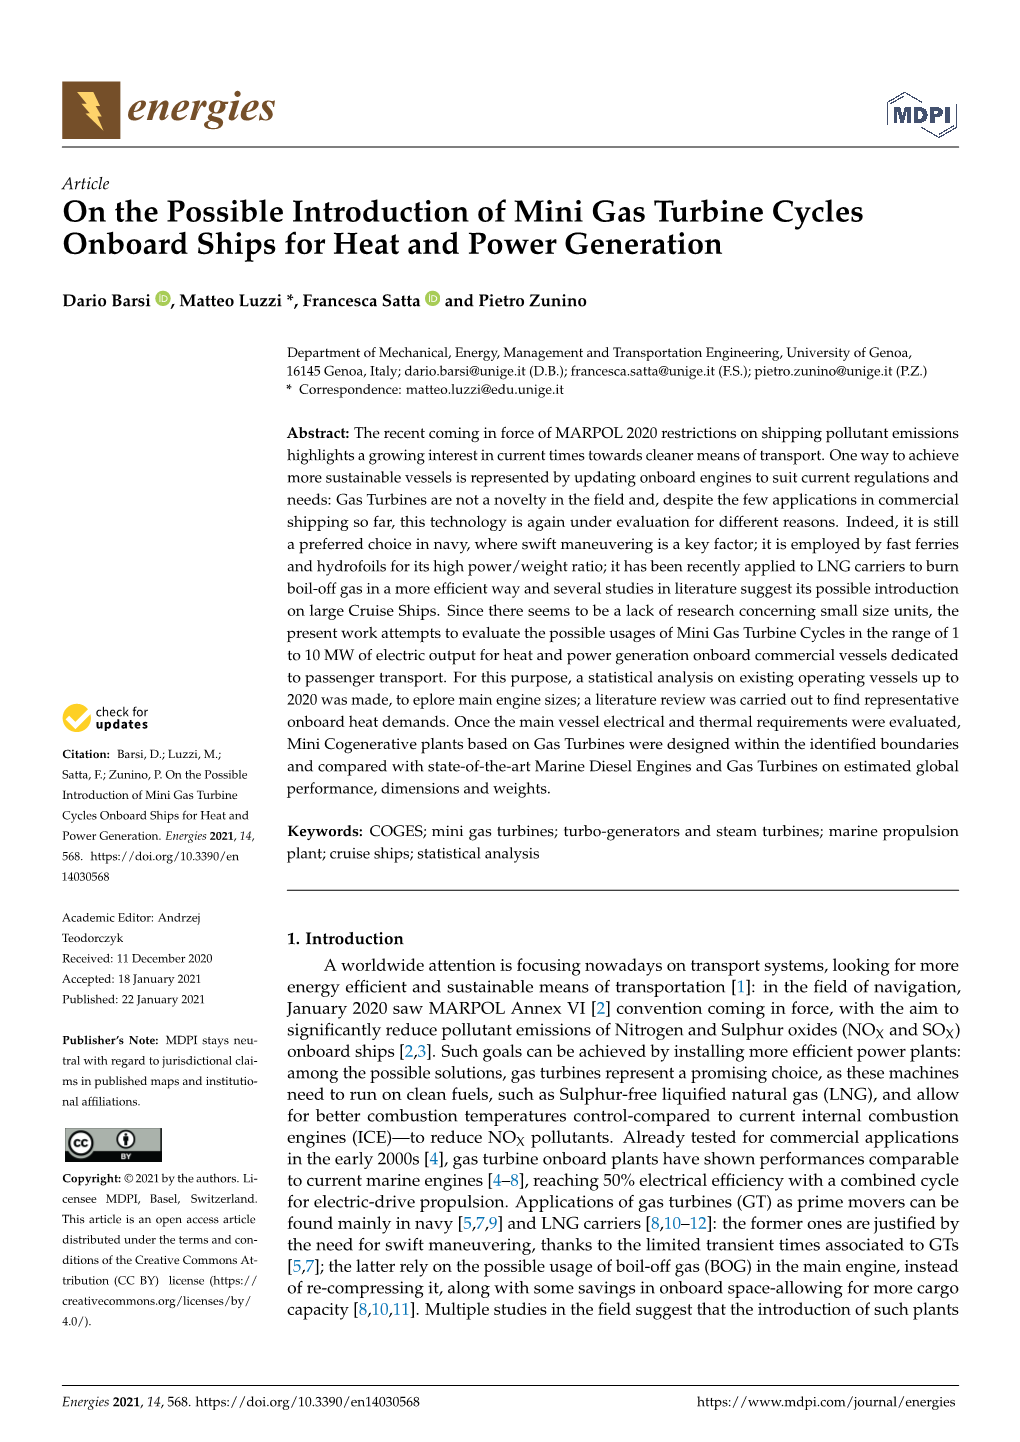 On the Possible Introduction of Mini Gas Turbine Cycles Onboard Ships for Heat and Power Generation